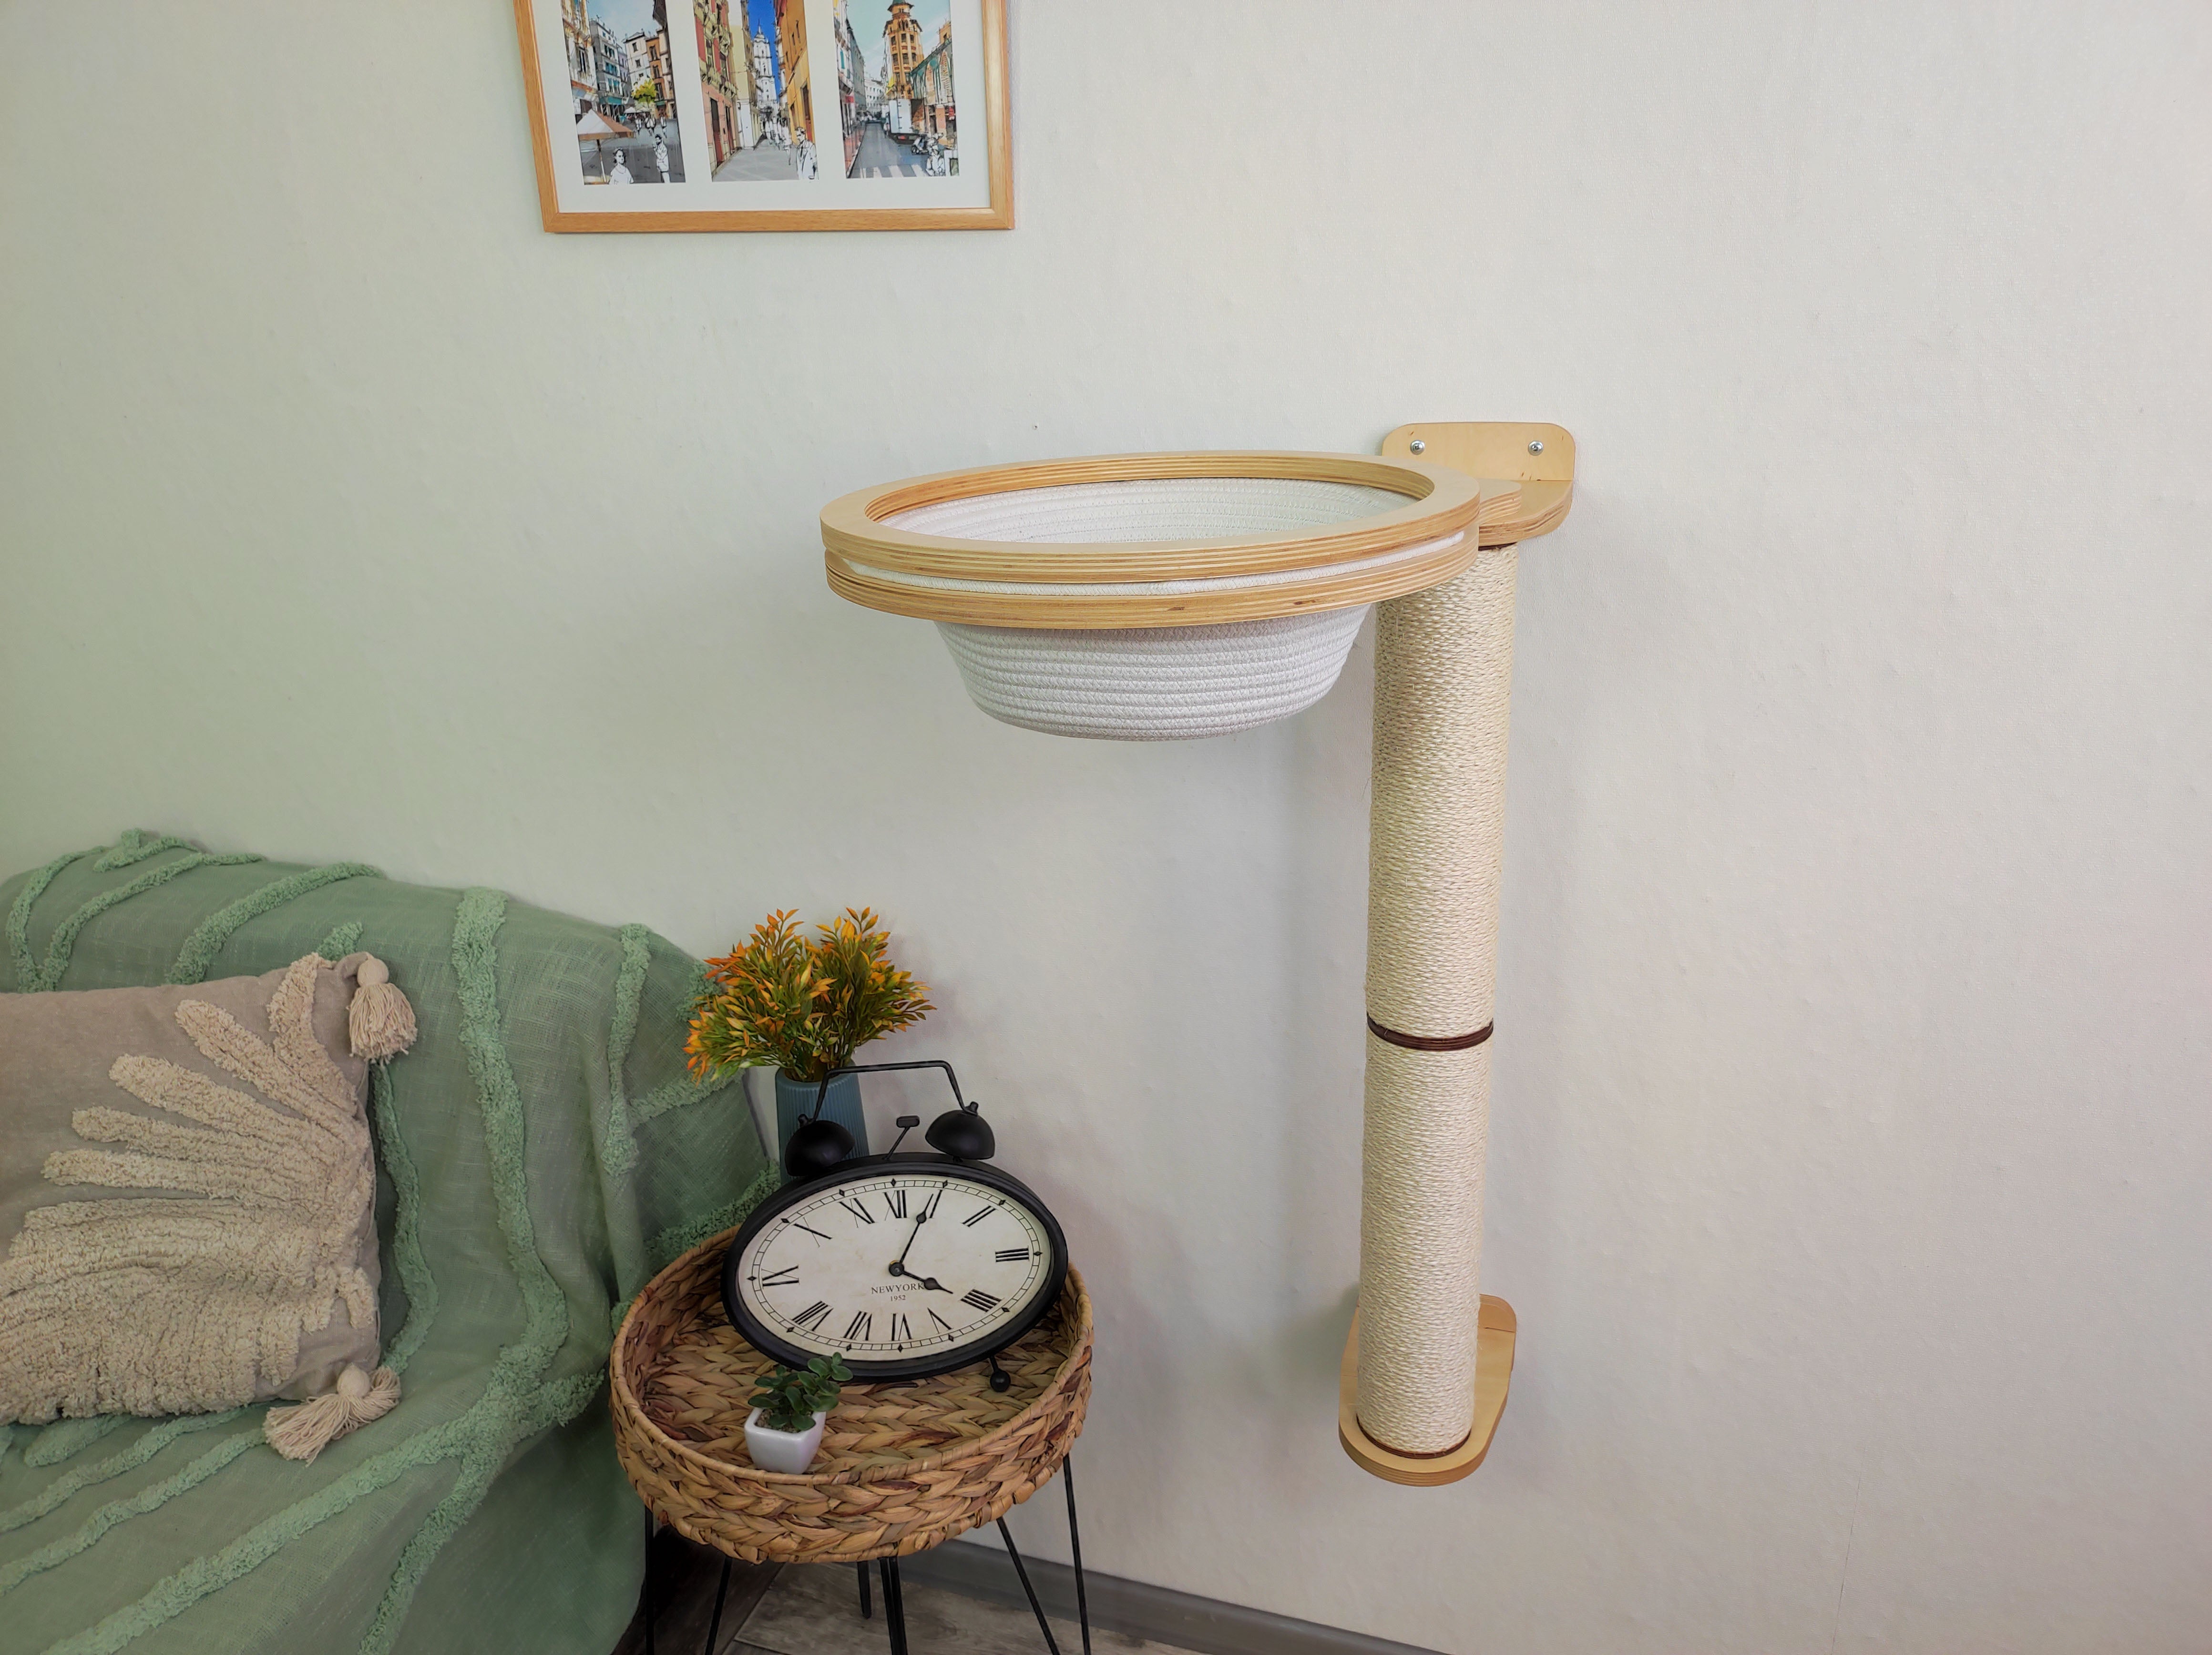 Wall-mounted cat tower with round cat rest basket